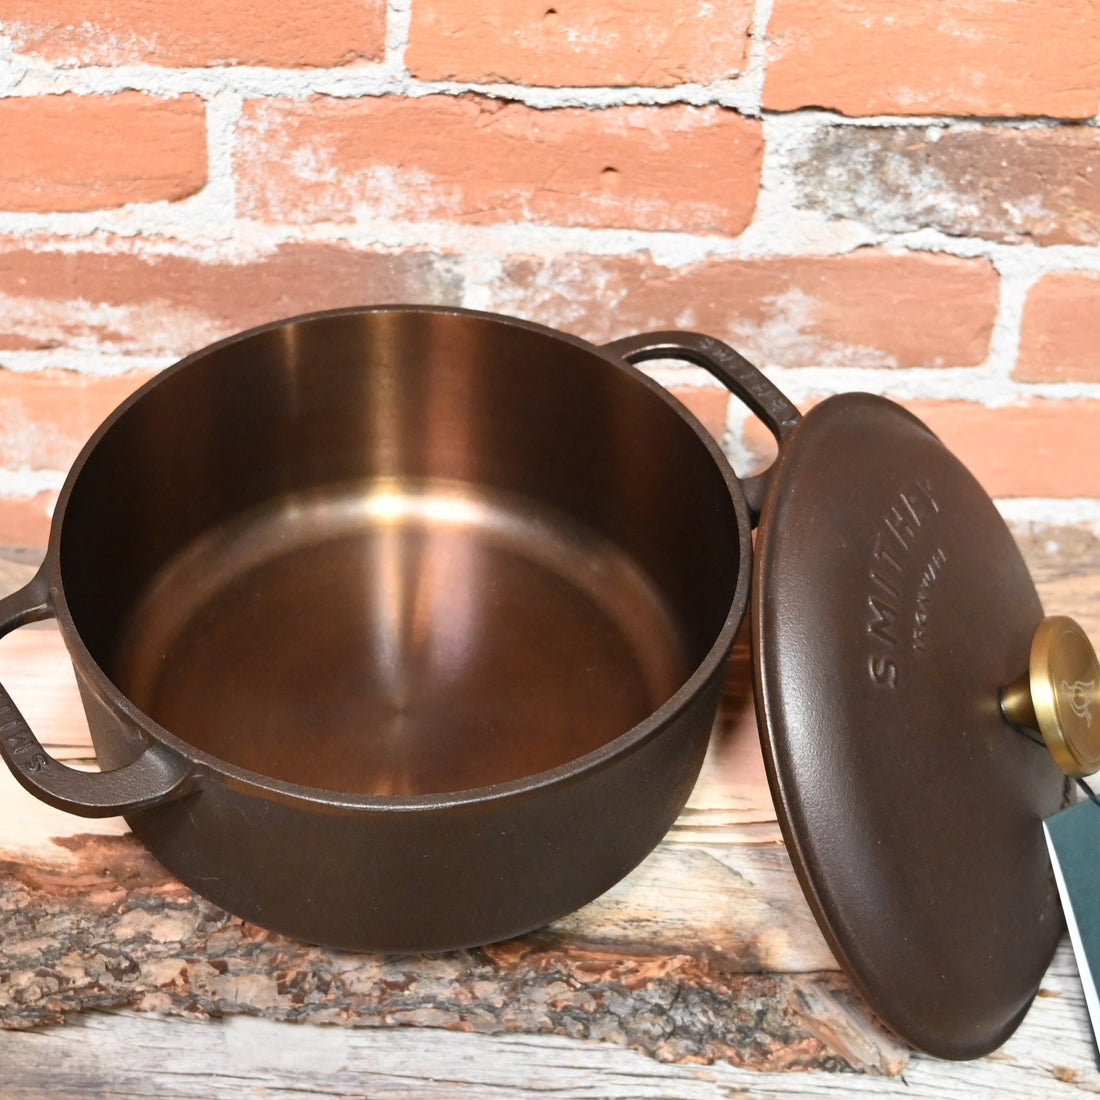 Smithey 10in Cast Iron Chef Skillet – Atomic 79